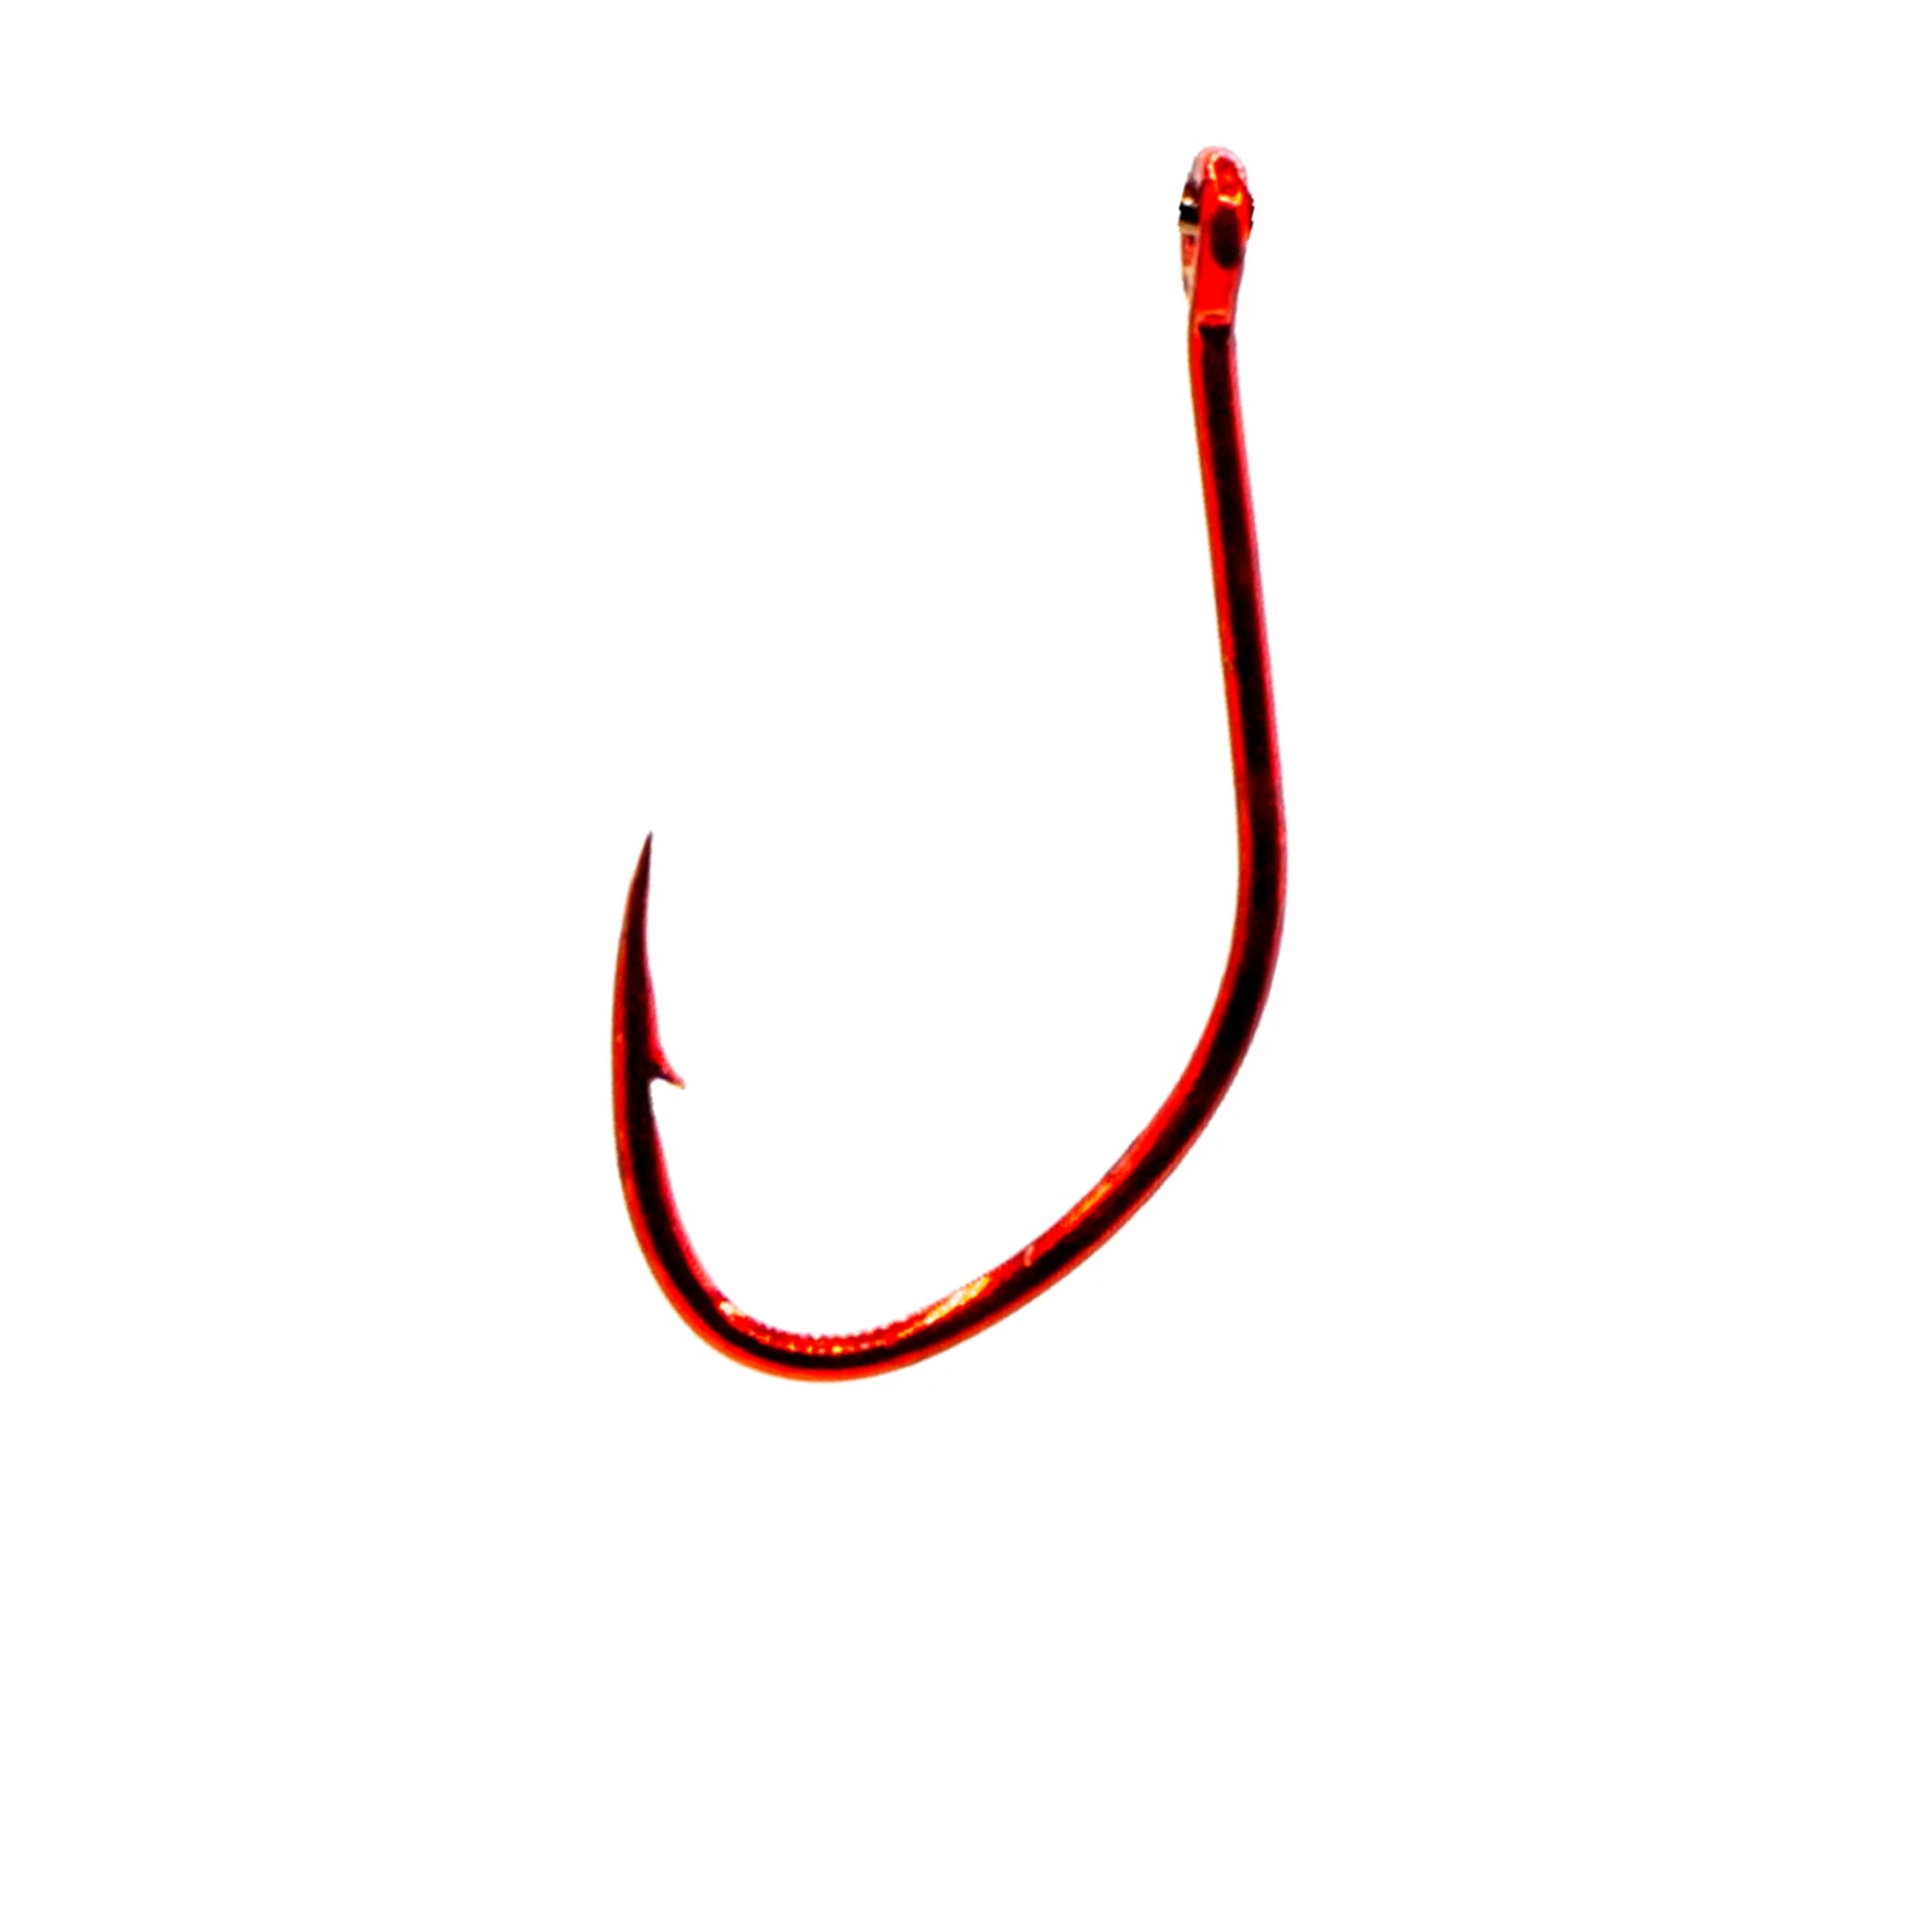 P-LINE FLOROCLEAR  Copperstate Tackle